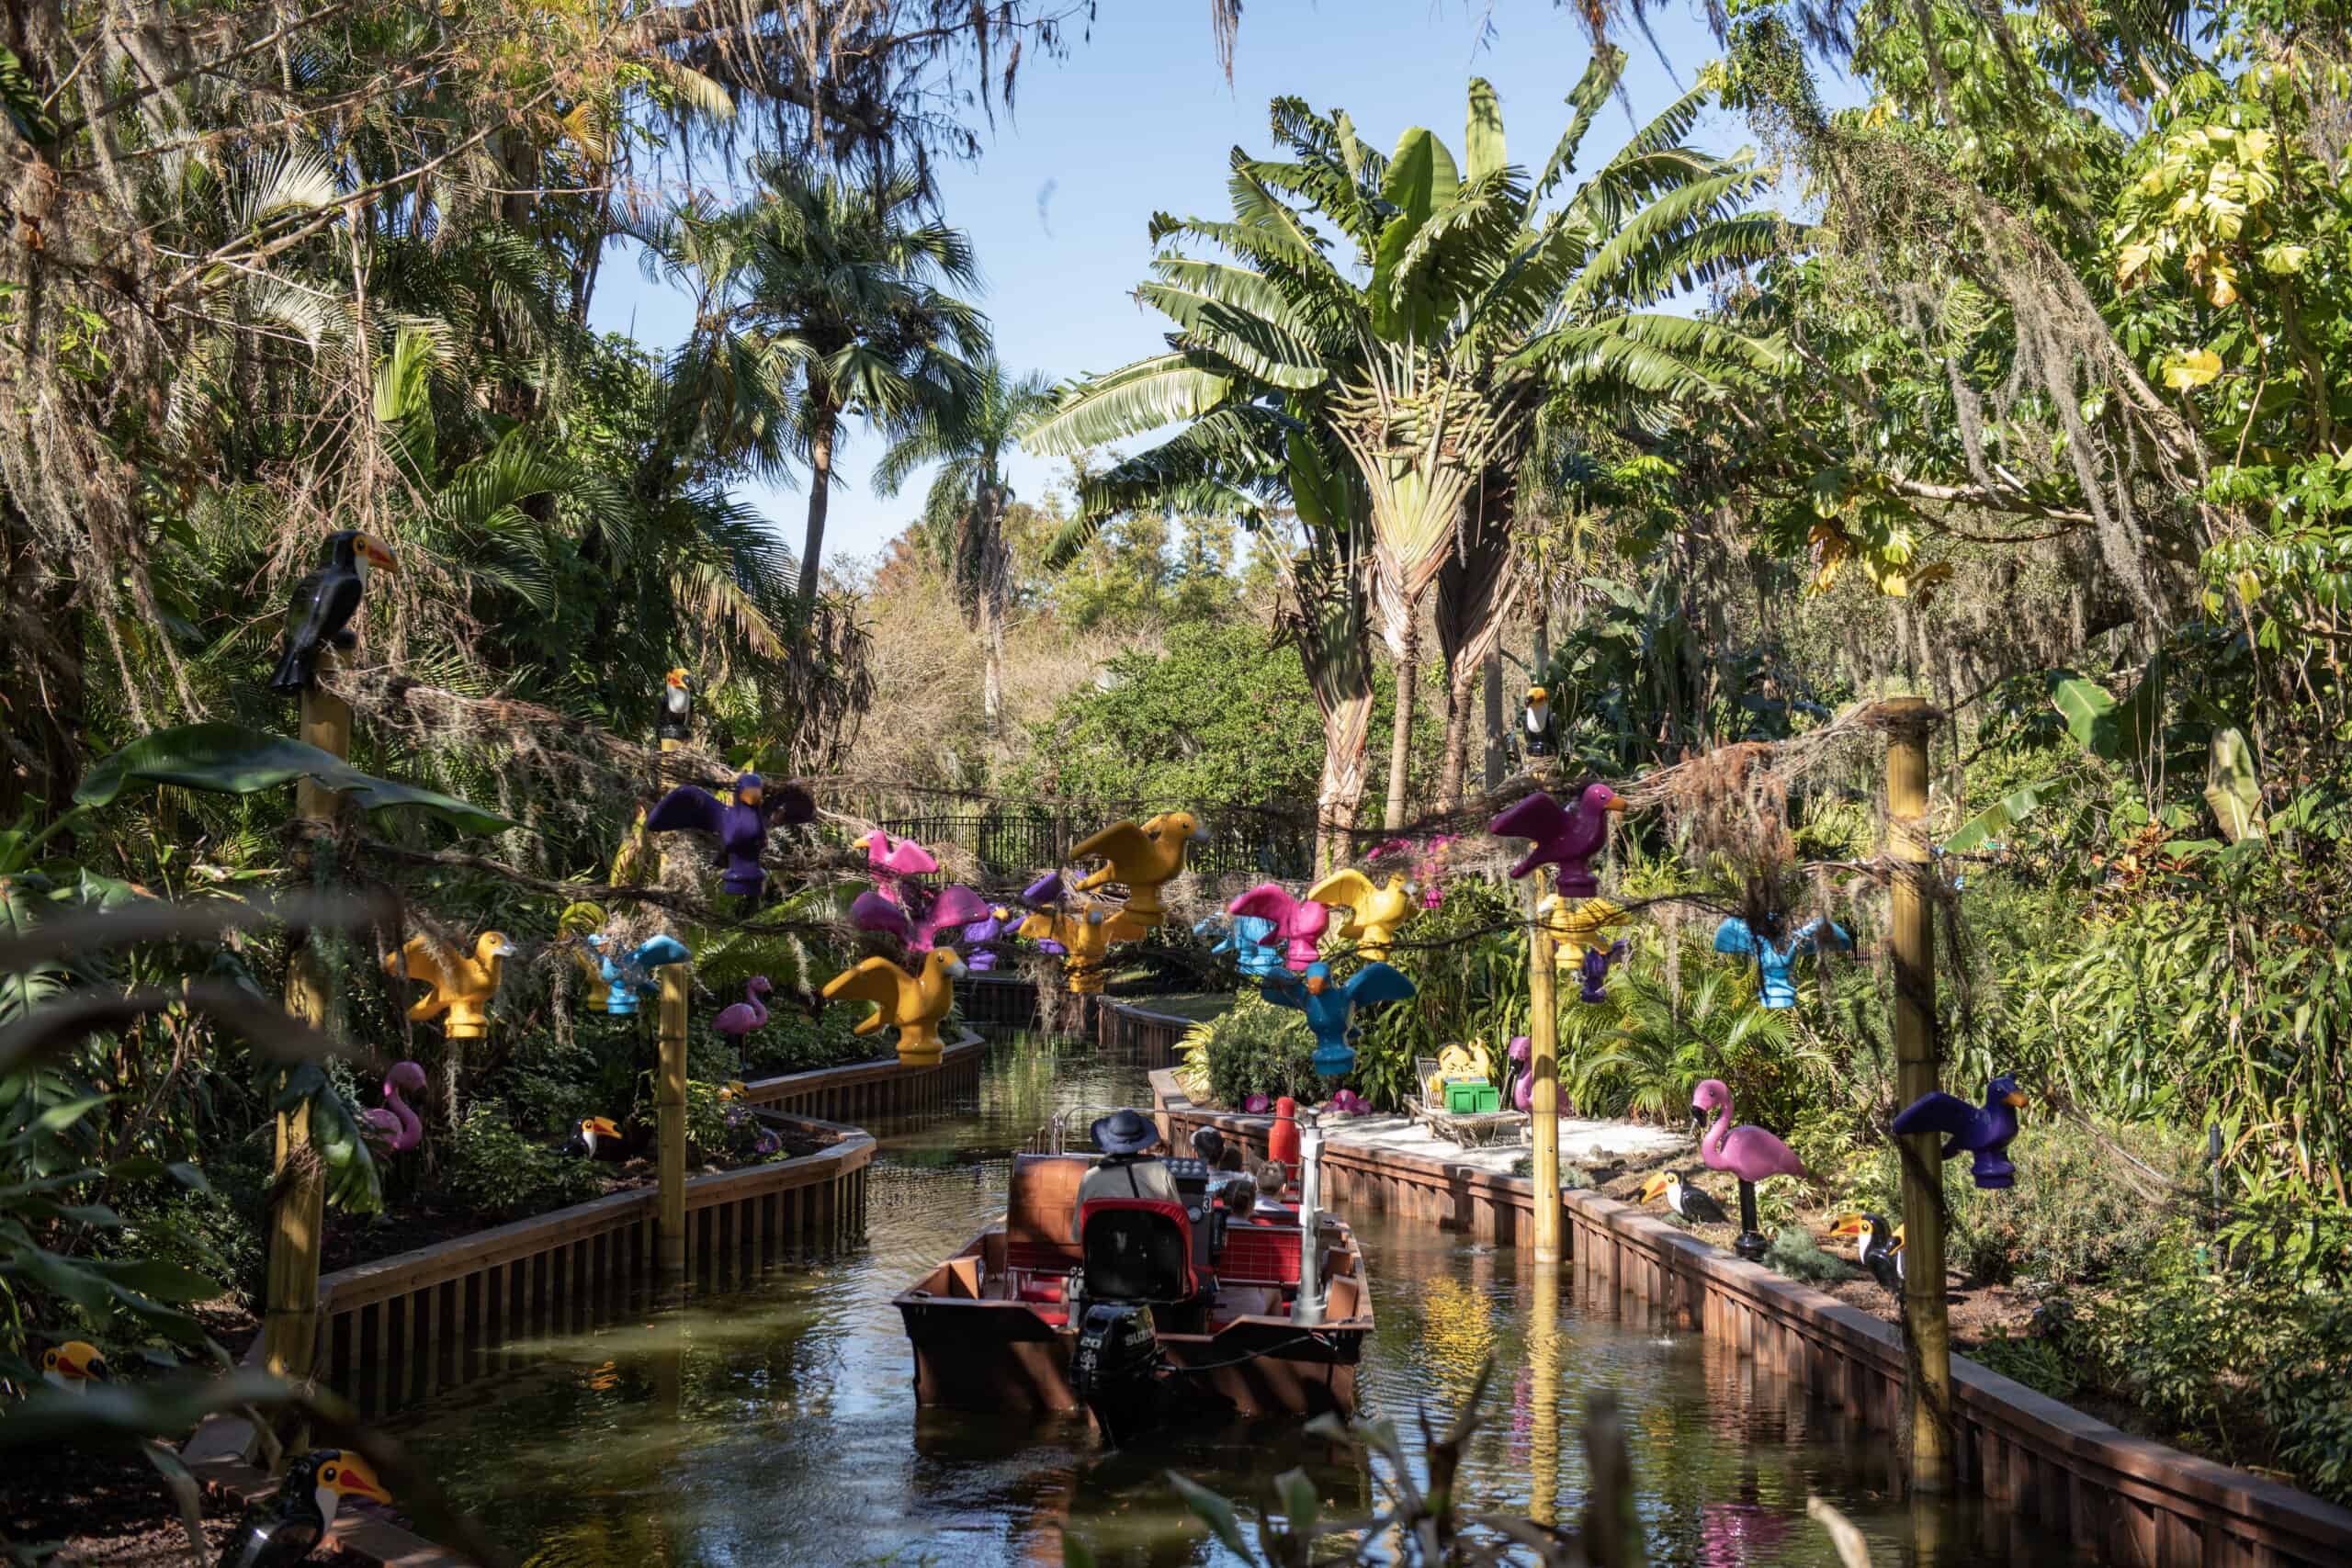 <p>Twenty years after closing, the historical canal boats returned with a LEGO twist. The park’s newest ride, Pirate River Quest, uses much of the same canal route as the original attraction, with the finale taking guests out onto Lake Eloise for a view of the gardens not often seen.</p>